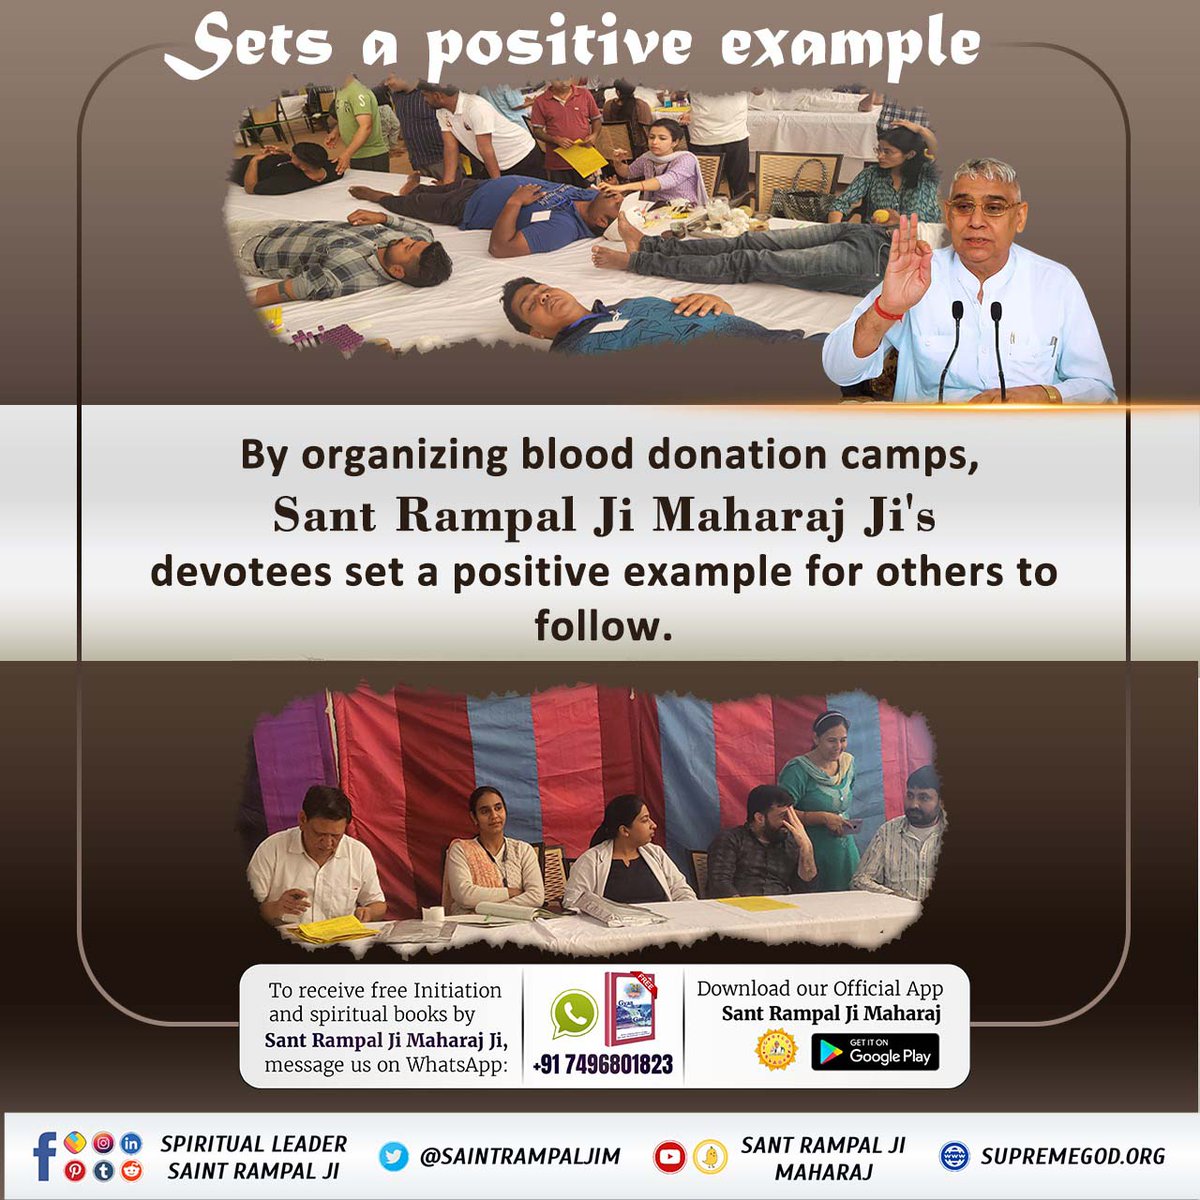 #SaveLives_DonateBlood 🤷‍♂️Sets a positive example By organizing blood donation camps, Sant Rampal Ji Maharaj Ji's devotees set a positive example for others to follow. Followers Of Sant Rampal Ji